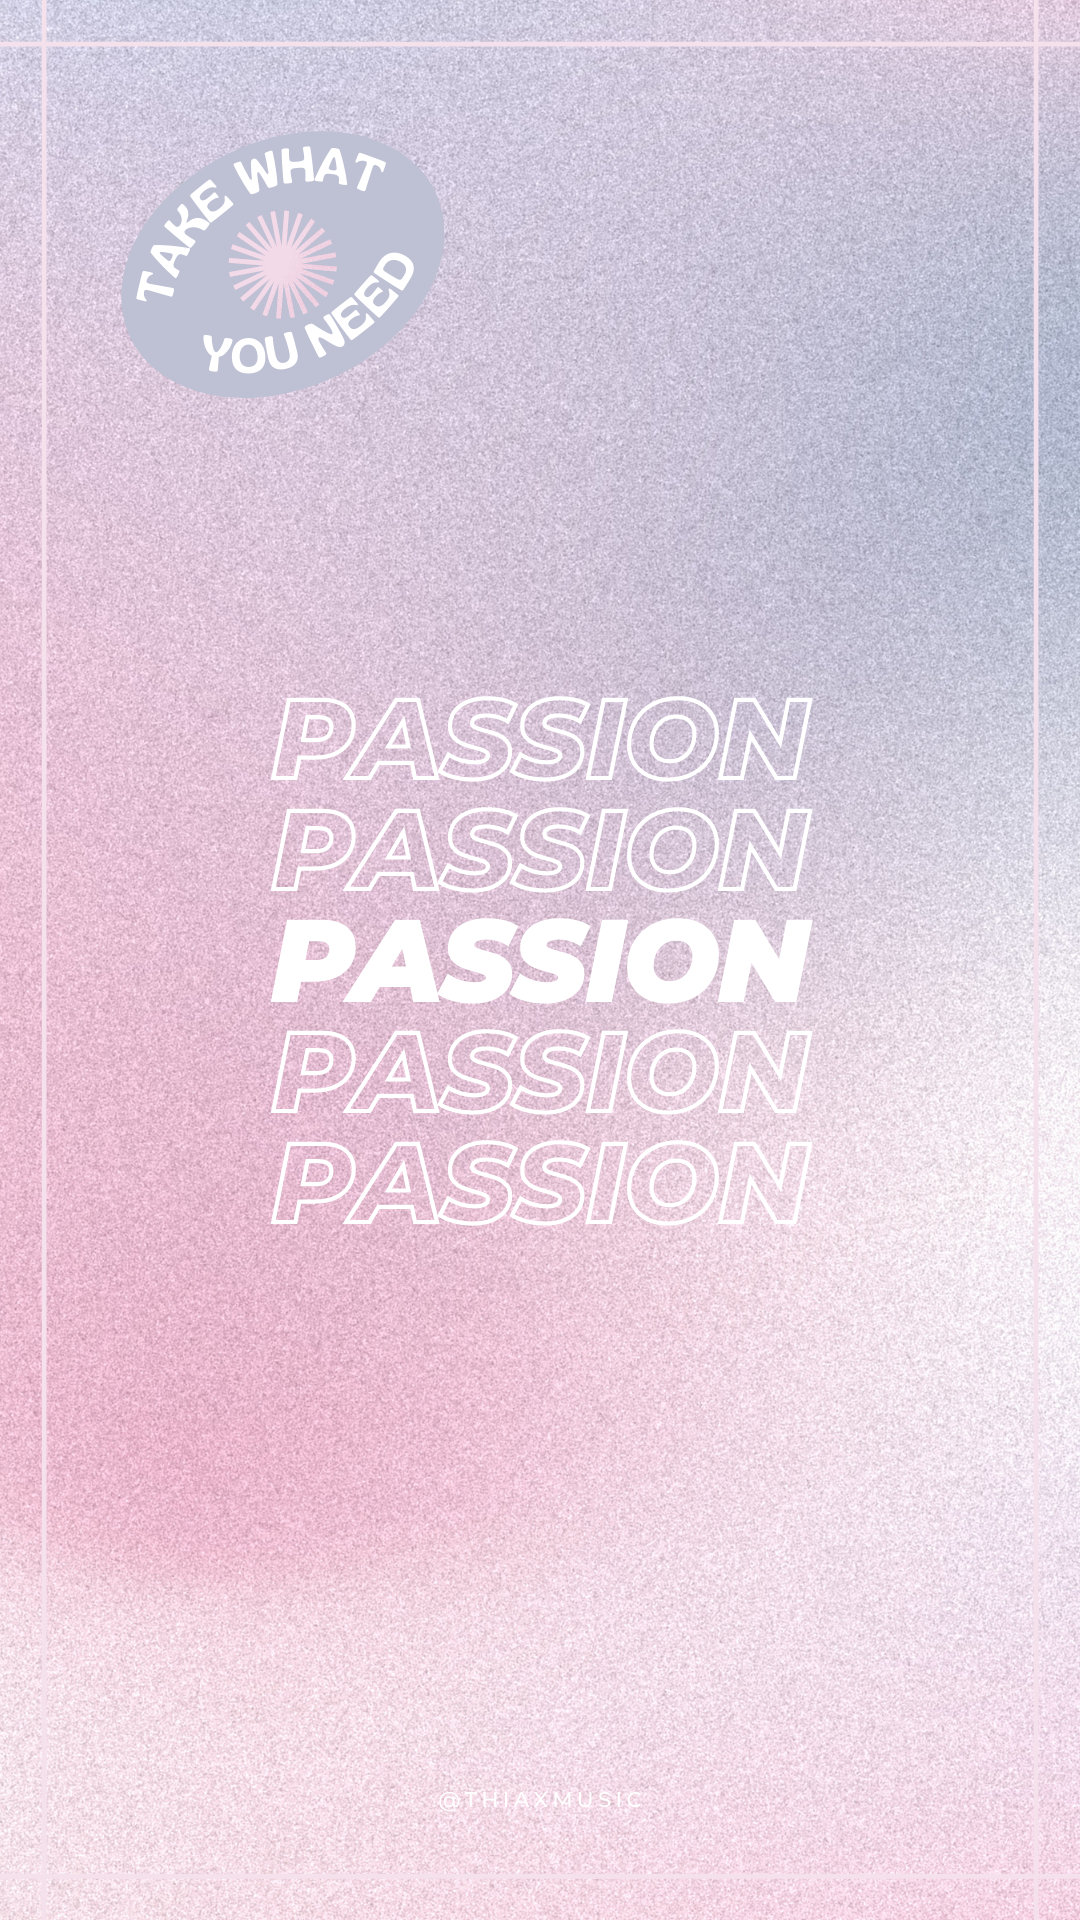 10 Passion.png